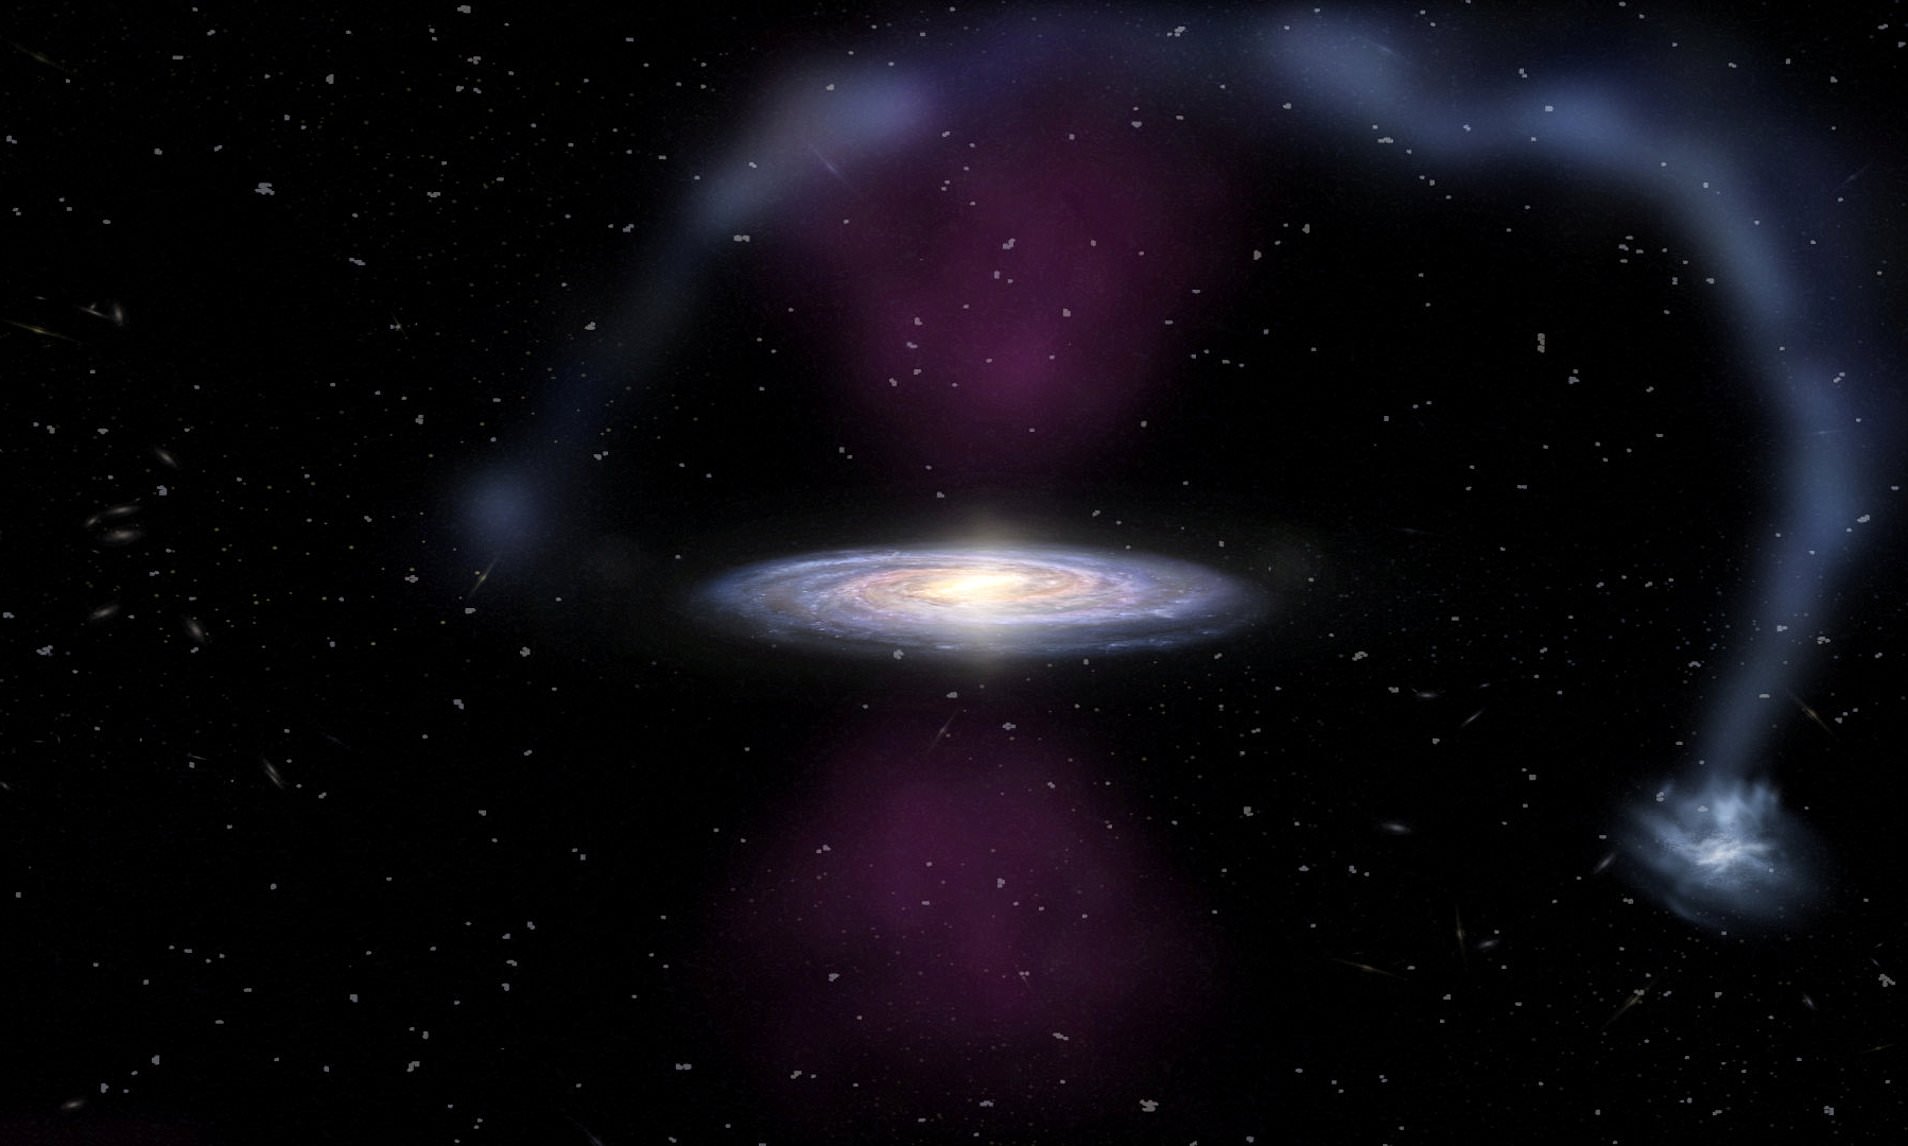 Supermassive Black Hole tosses star out of Milky Way cosmic system at speed of 3.7 million mph